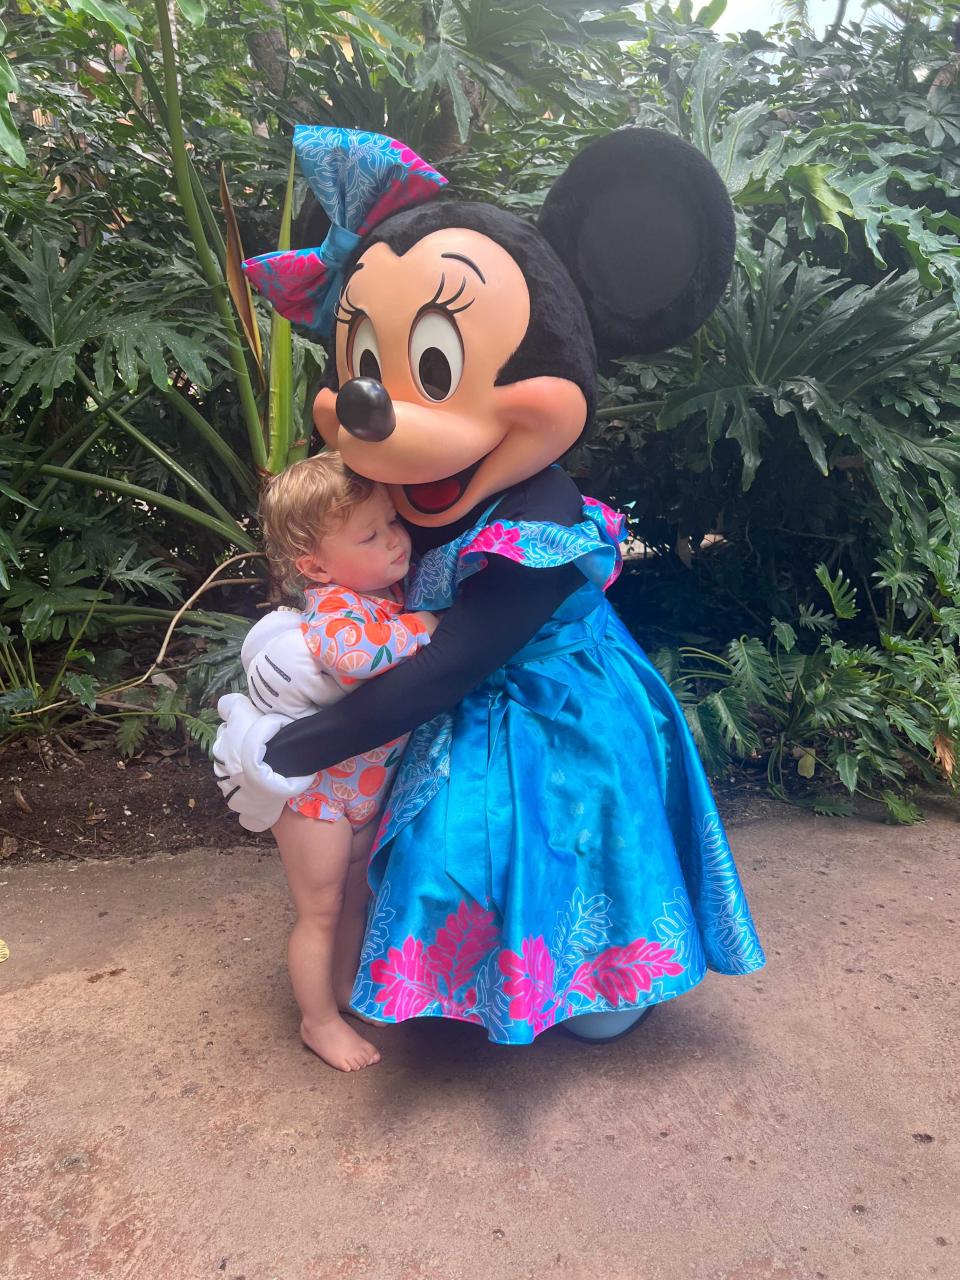 A young girl being embraced by Minnie Mouse